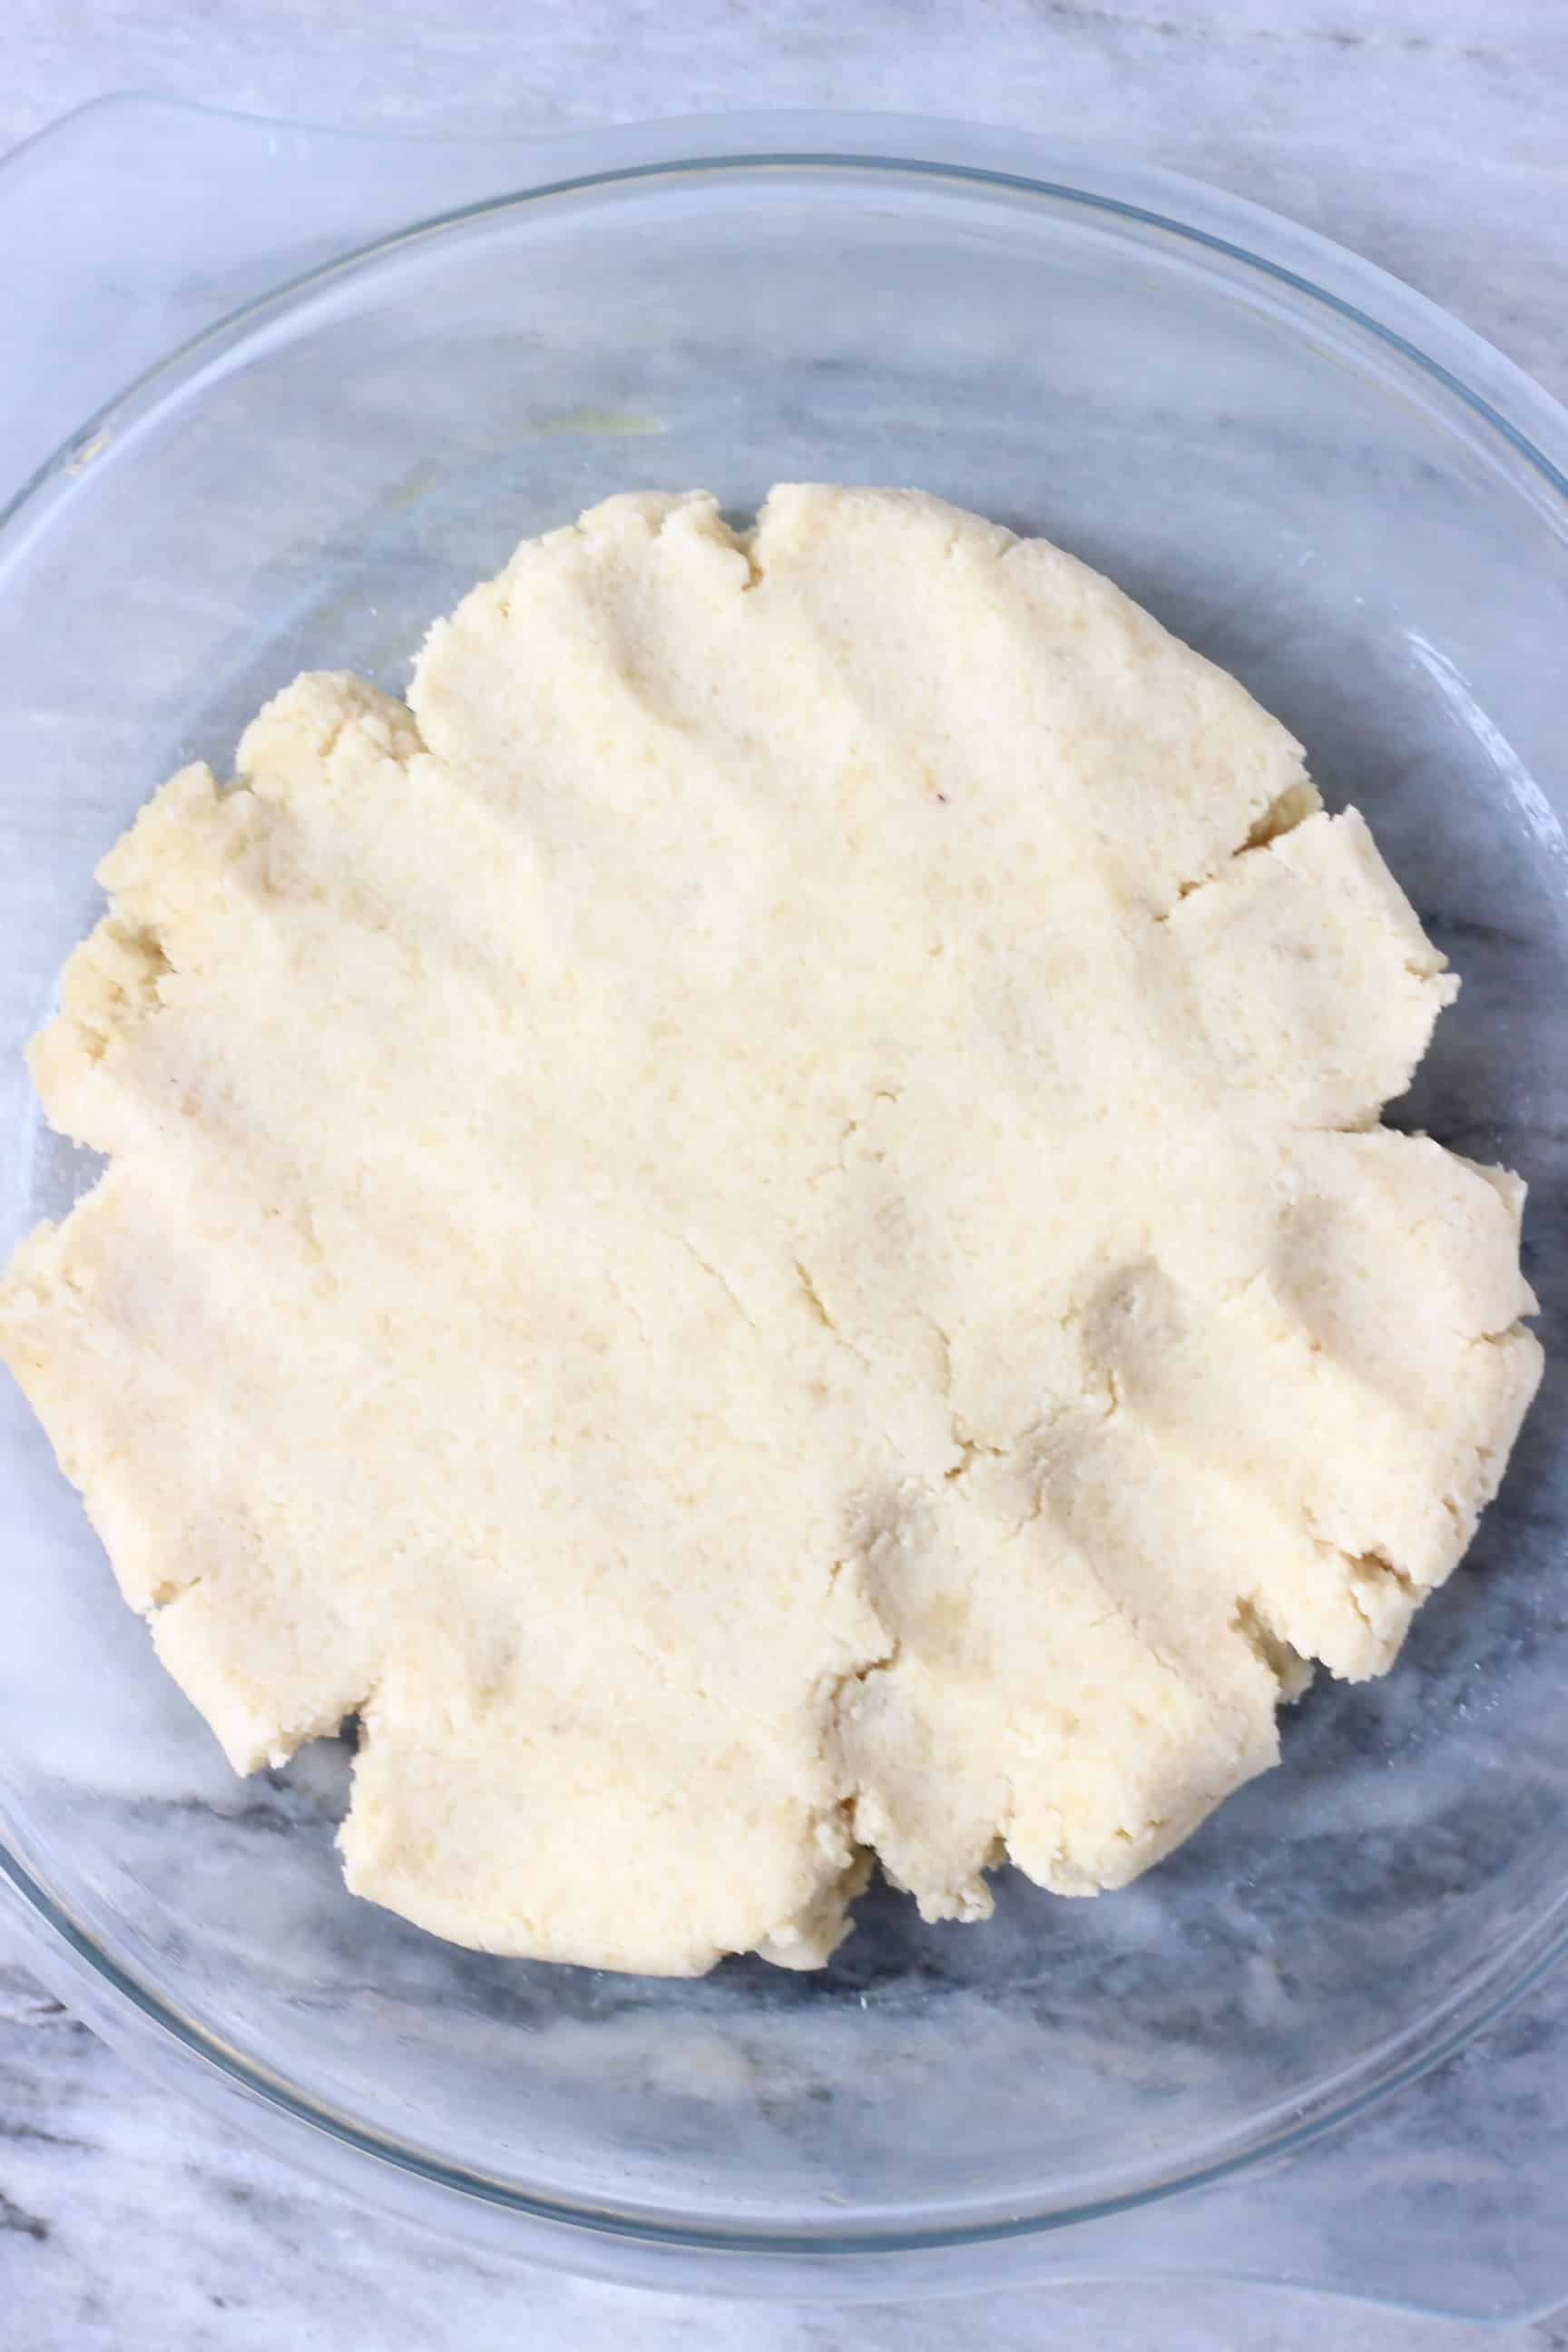 Raw gluten-free vegan pastry dough being pressed into a glass pie dish